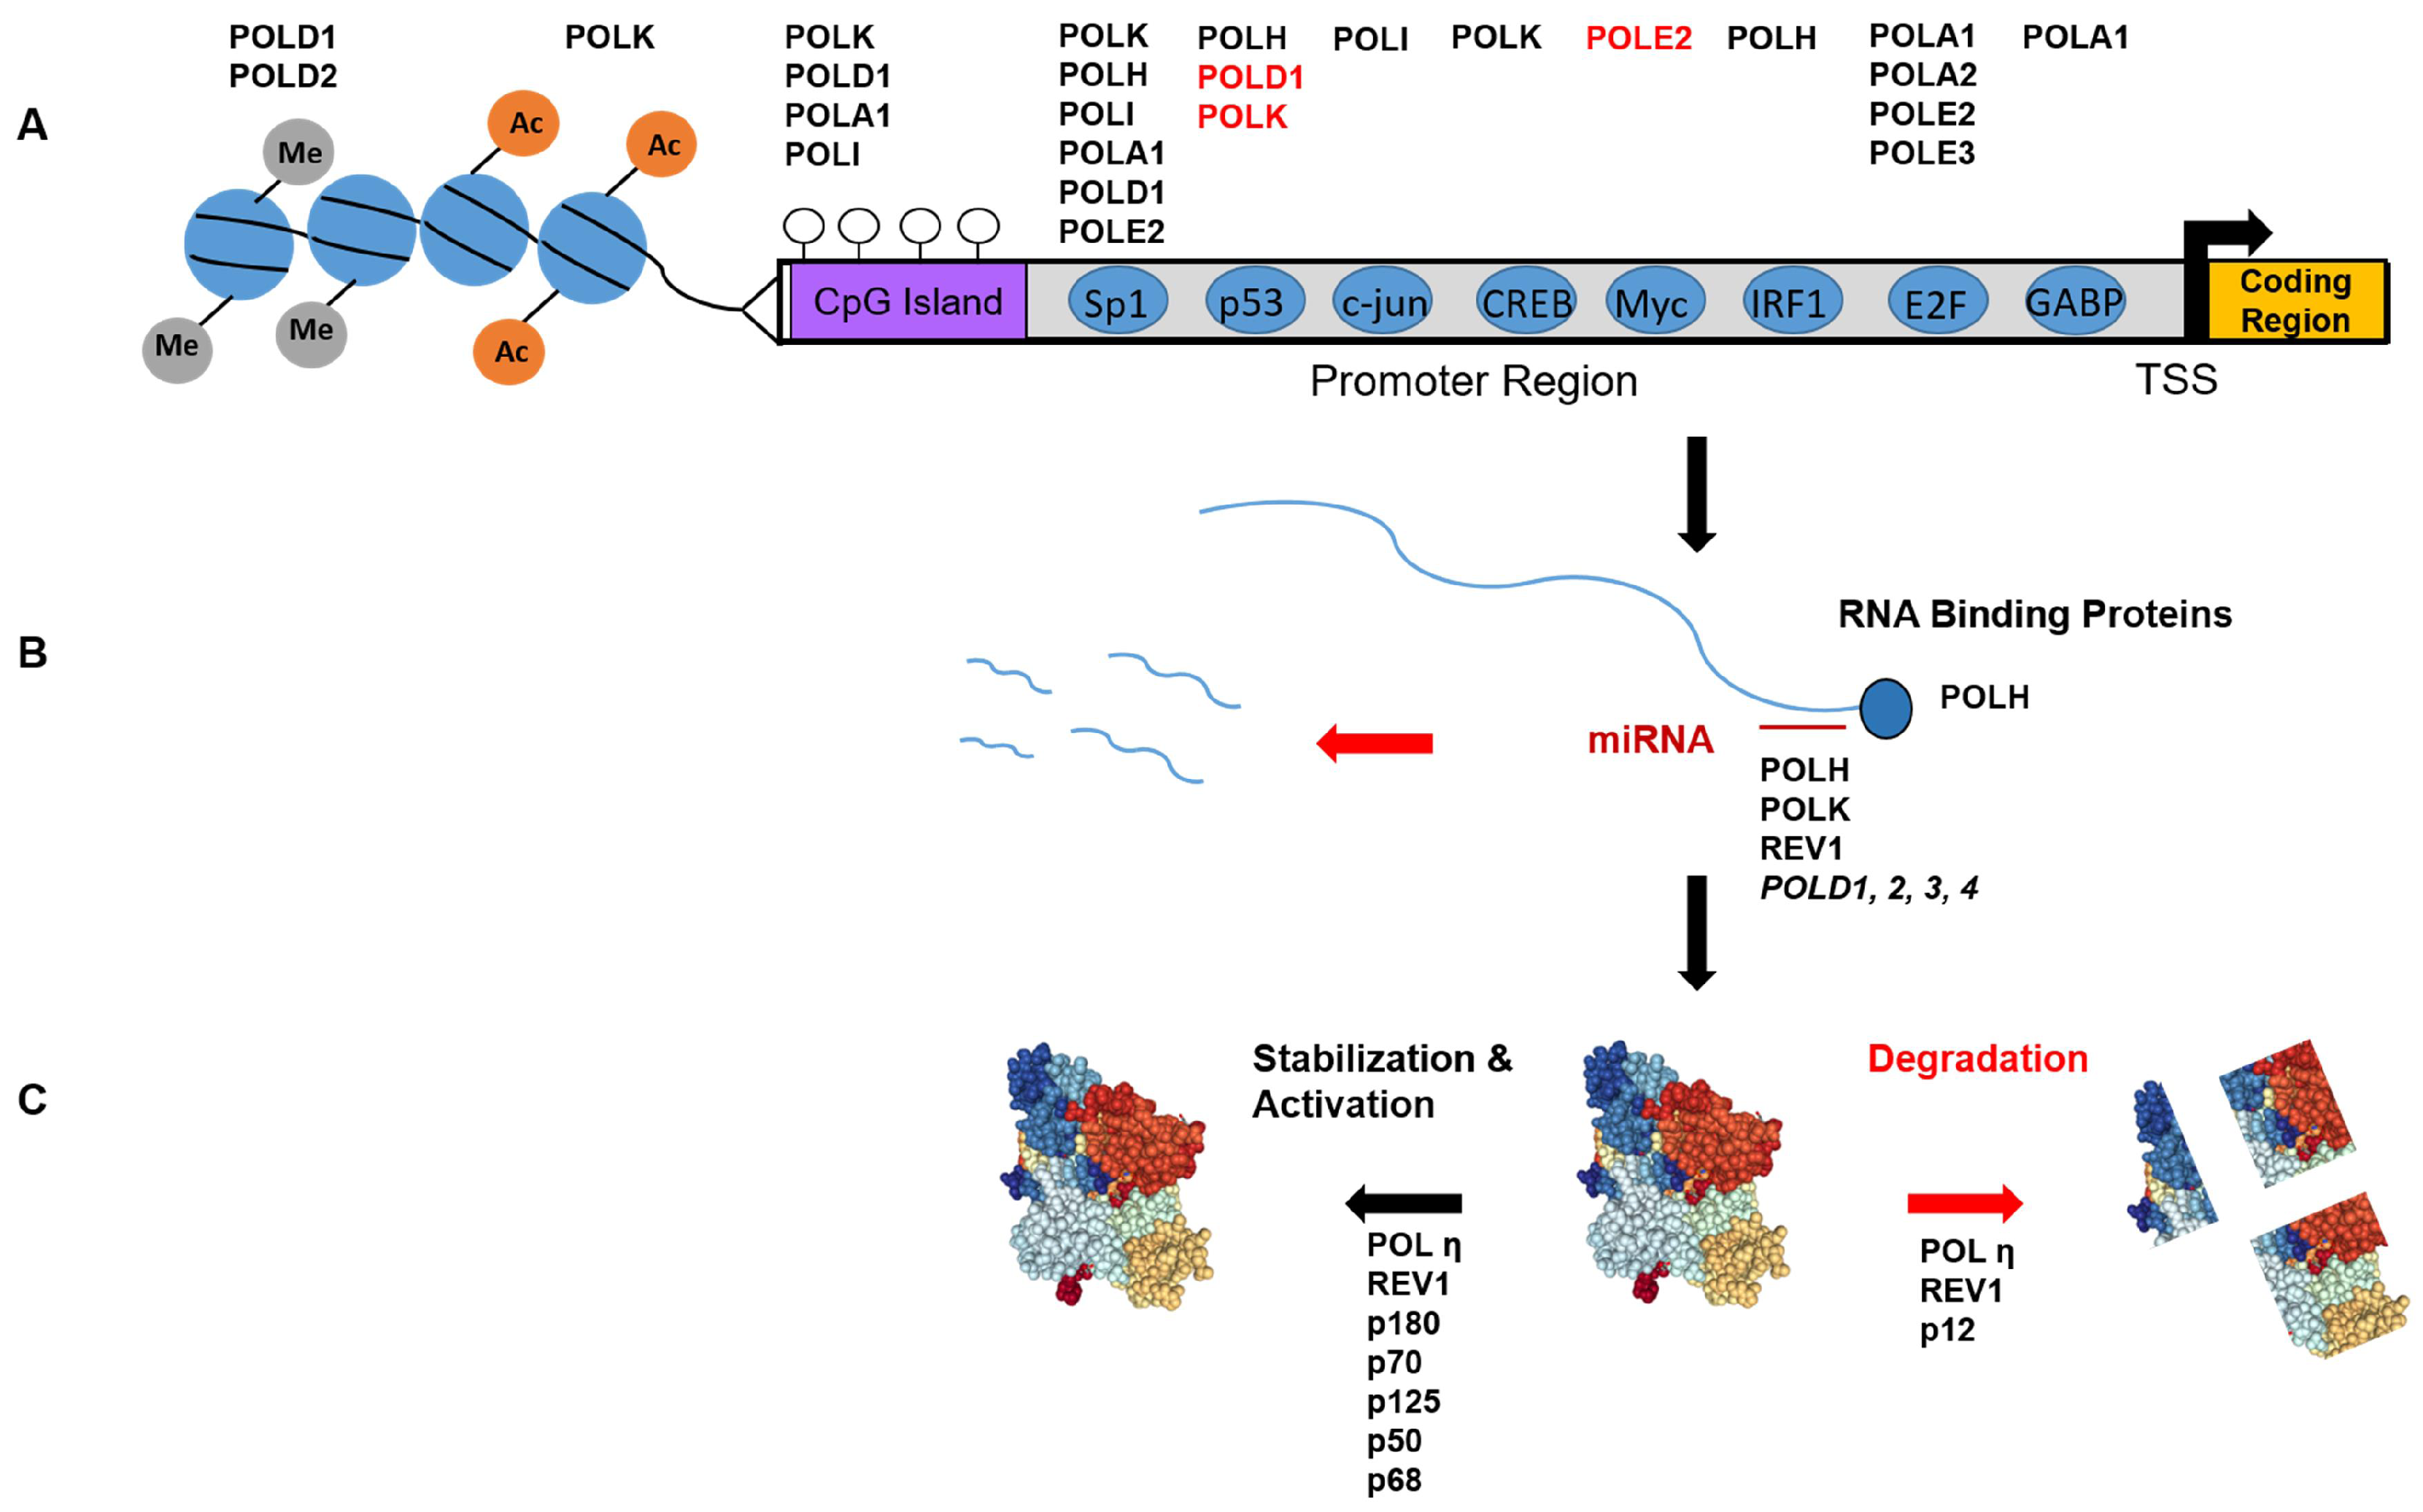 | Free Full-Text of Genome Integrity: How Mammalian Cells Orchestrate Genome Duplication by Coordinating Replicative and Specialized DNA Polymerases